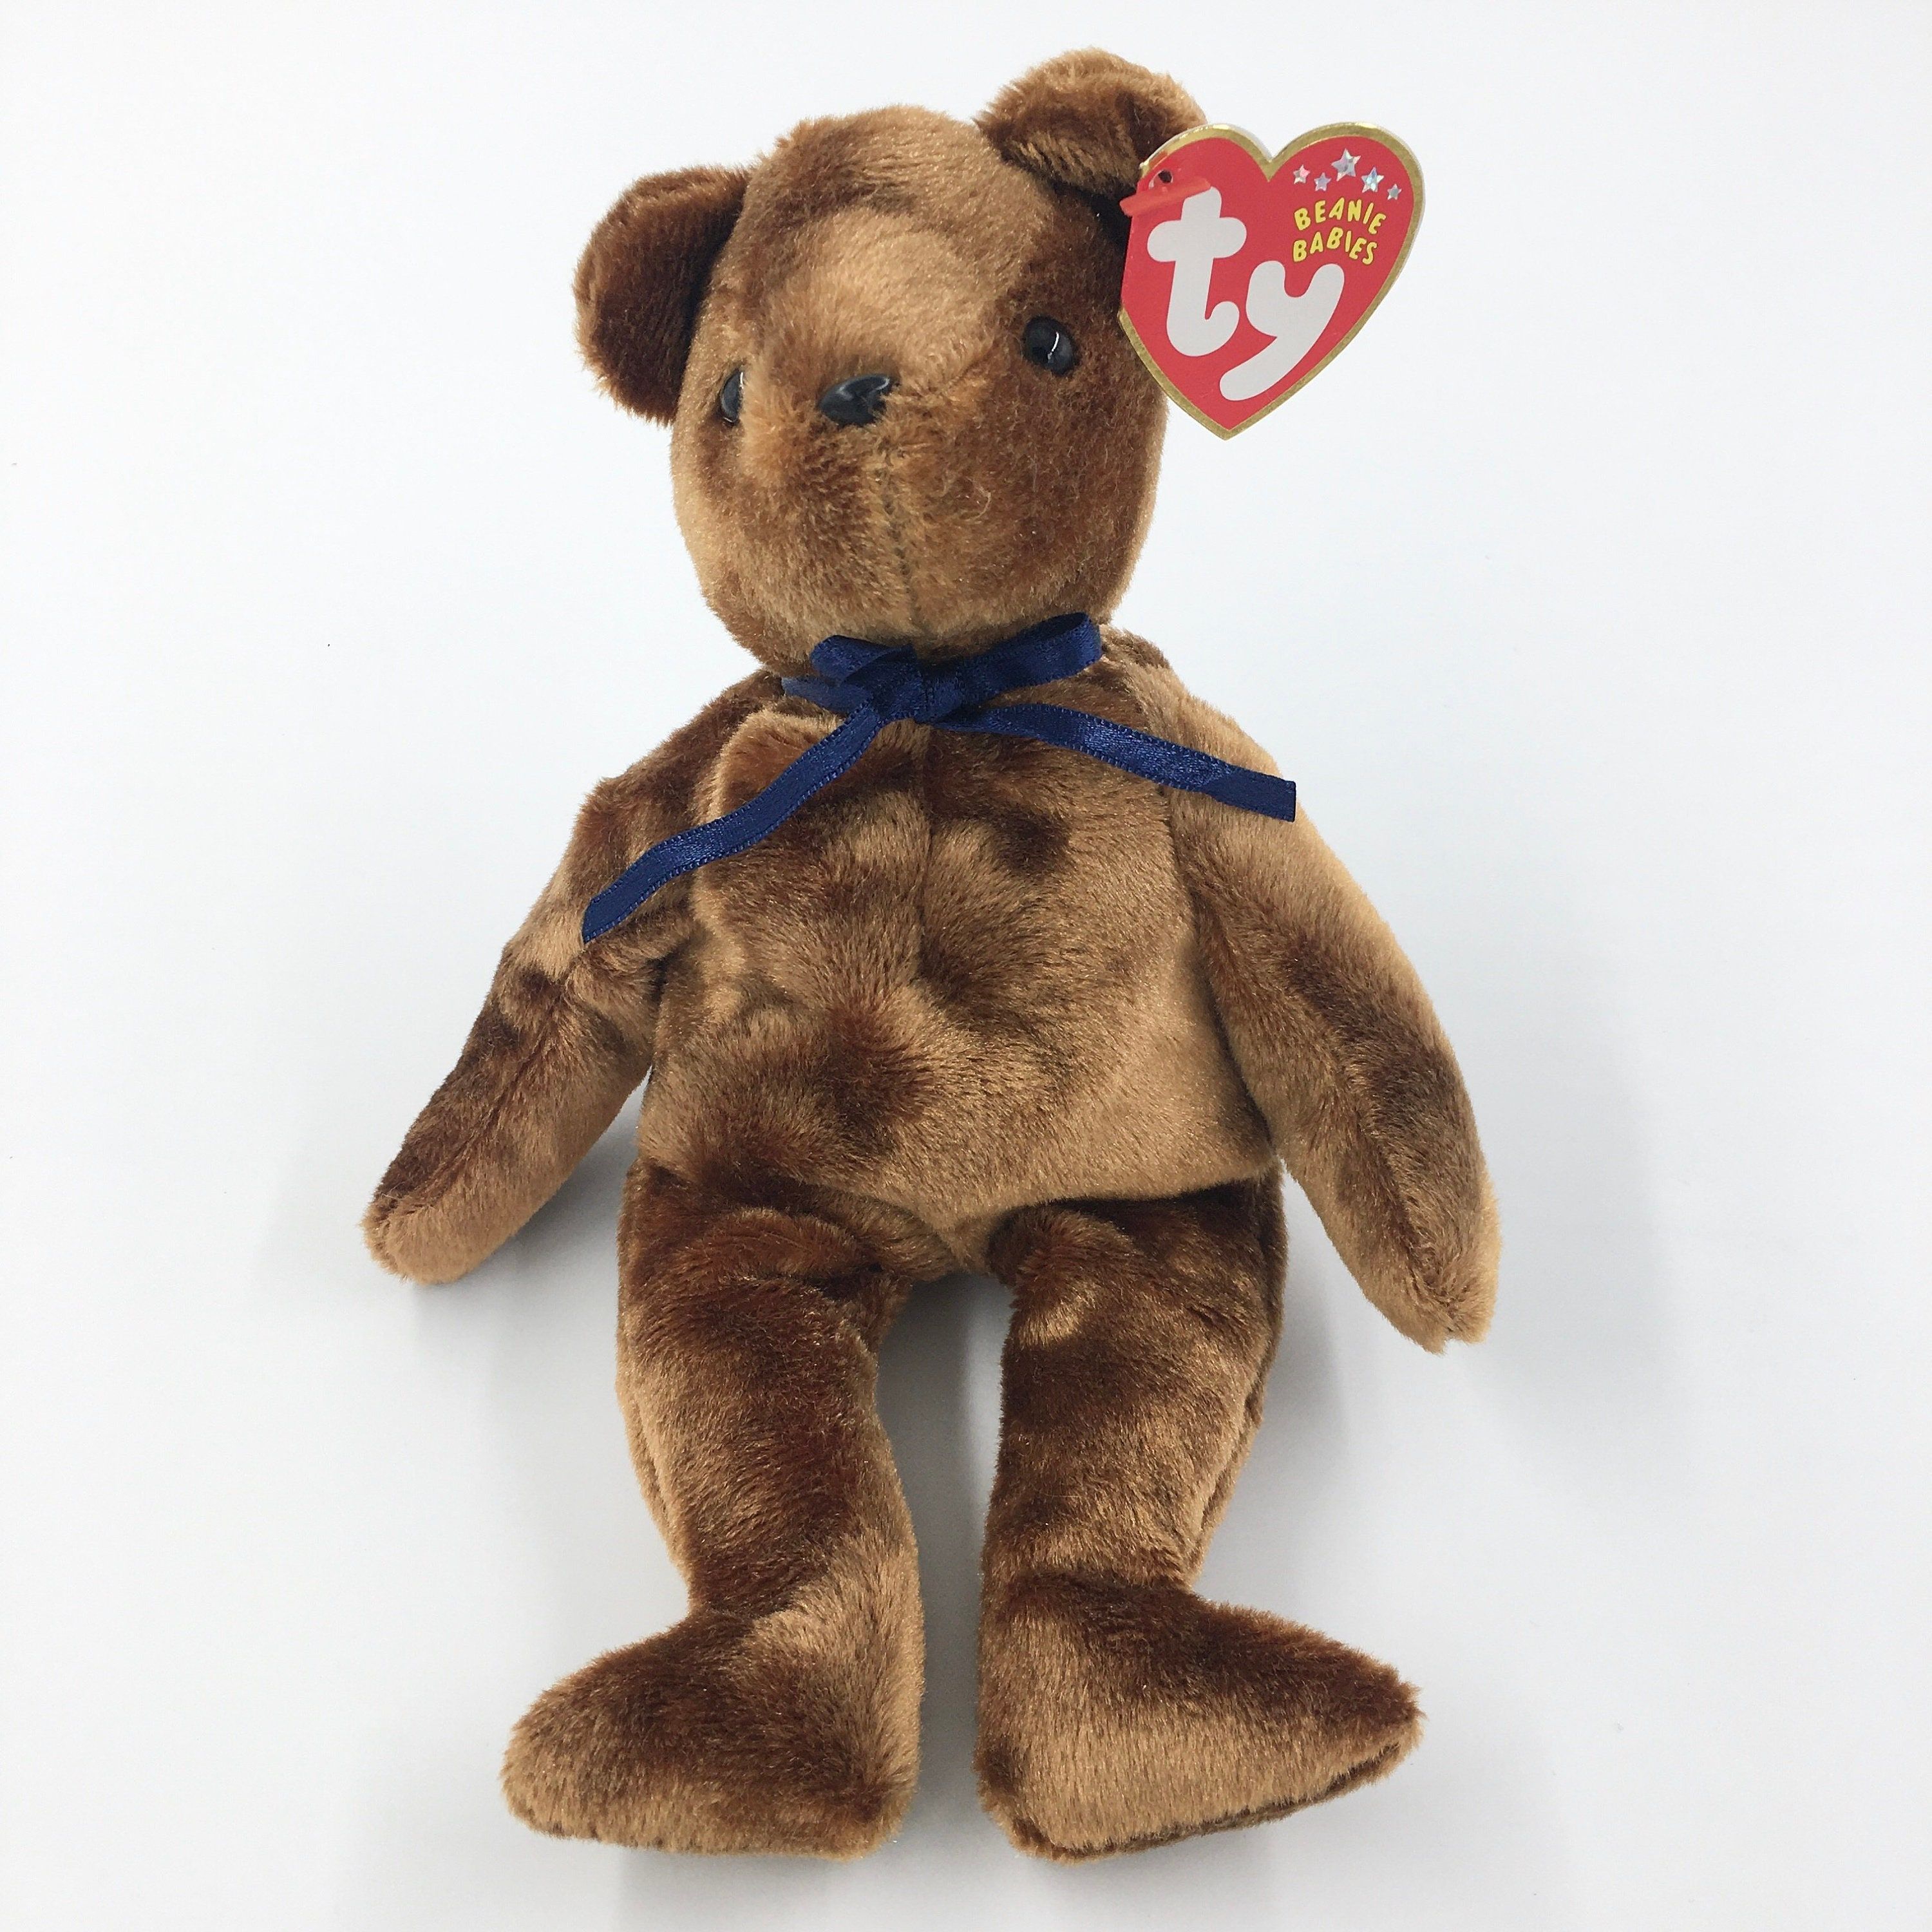 Beanie Baby: TED-e the Bear (TY Store Exclusive)